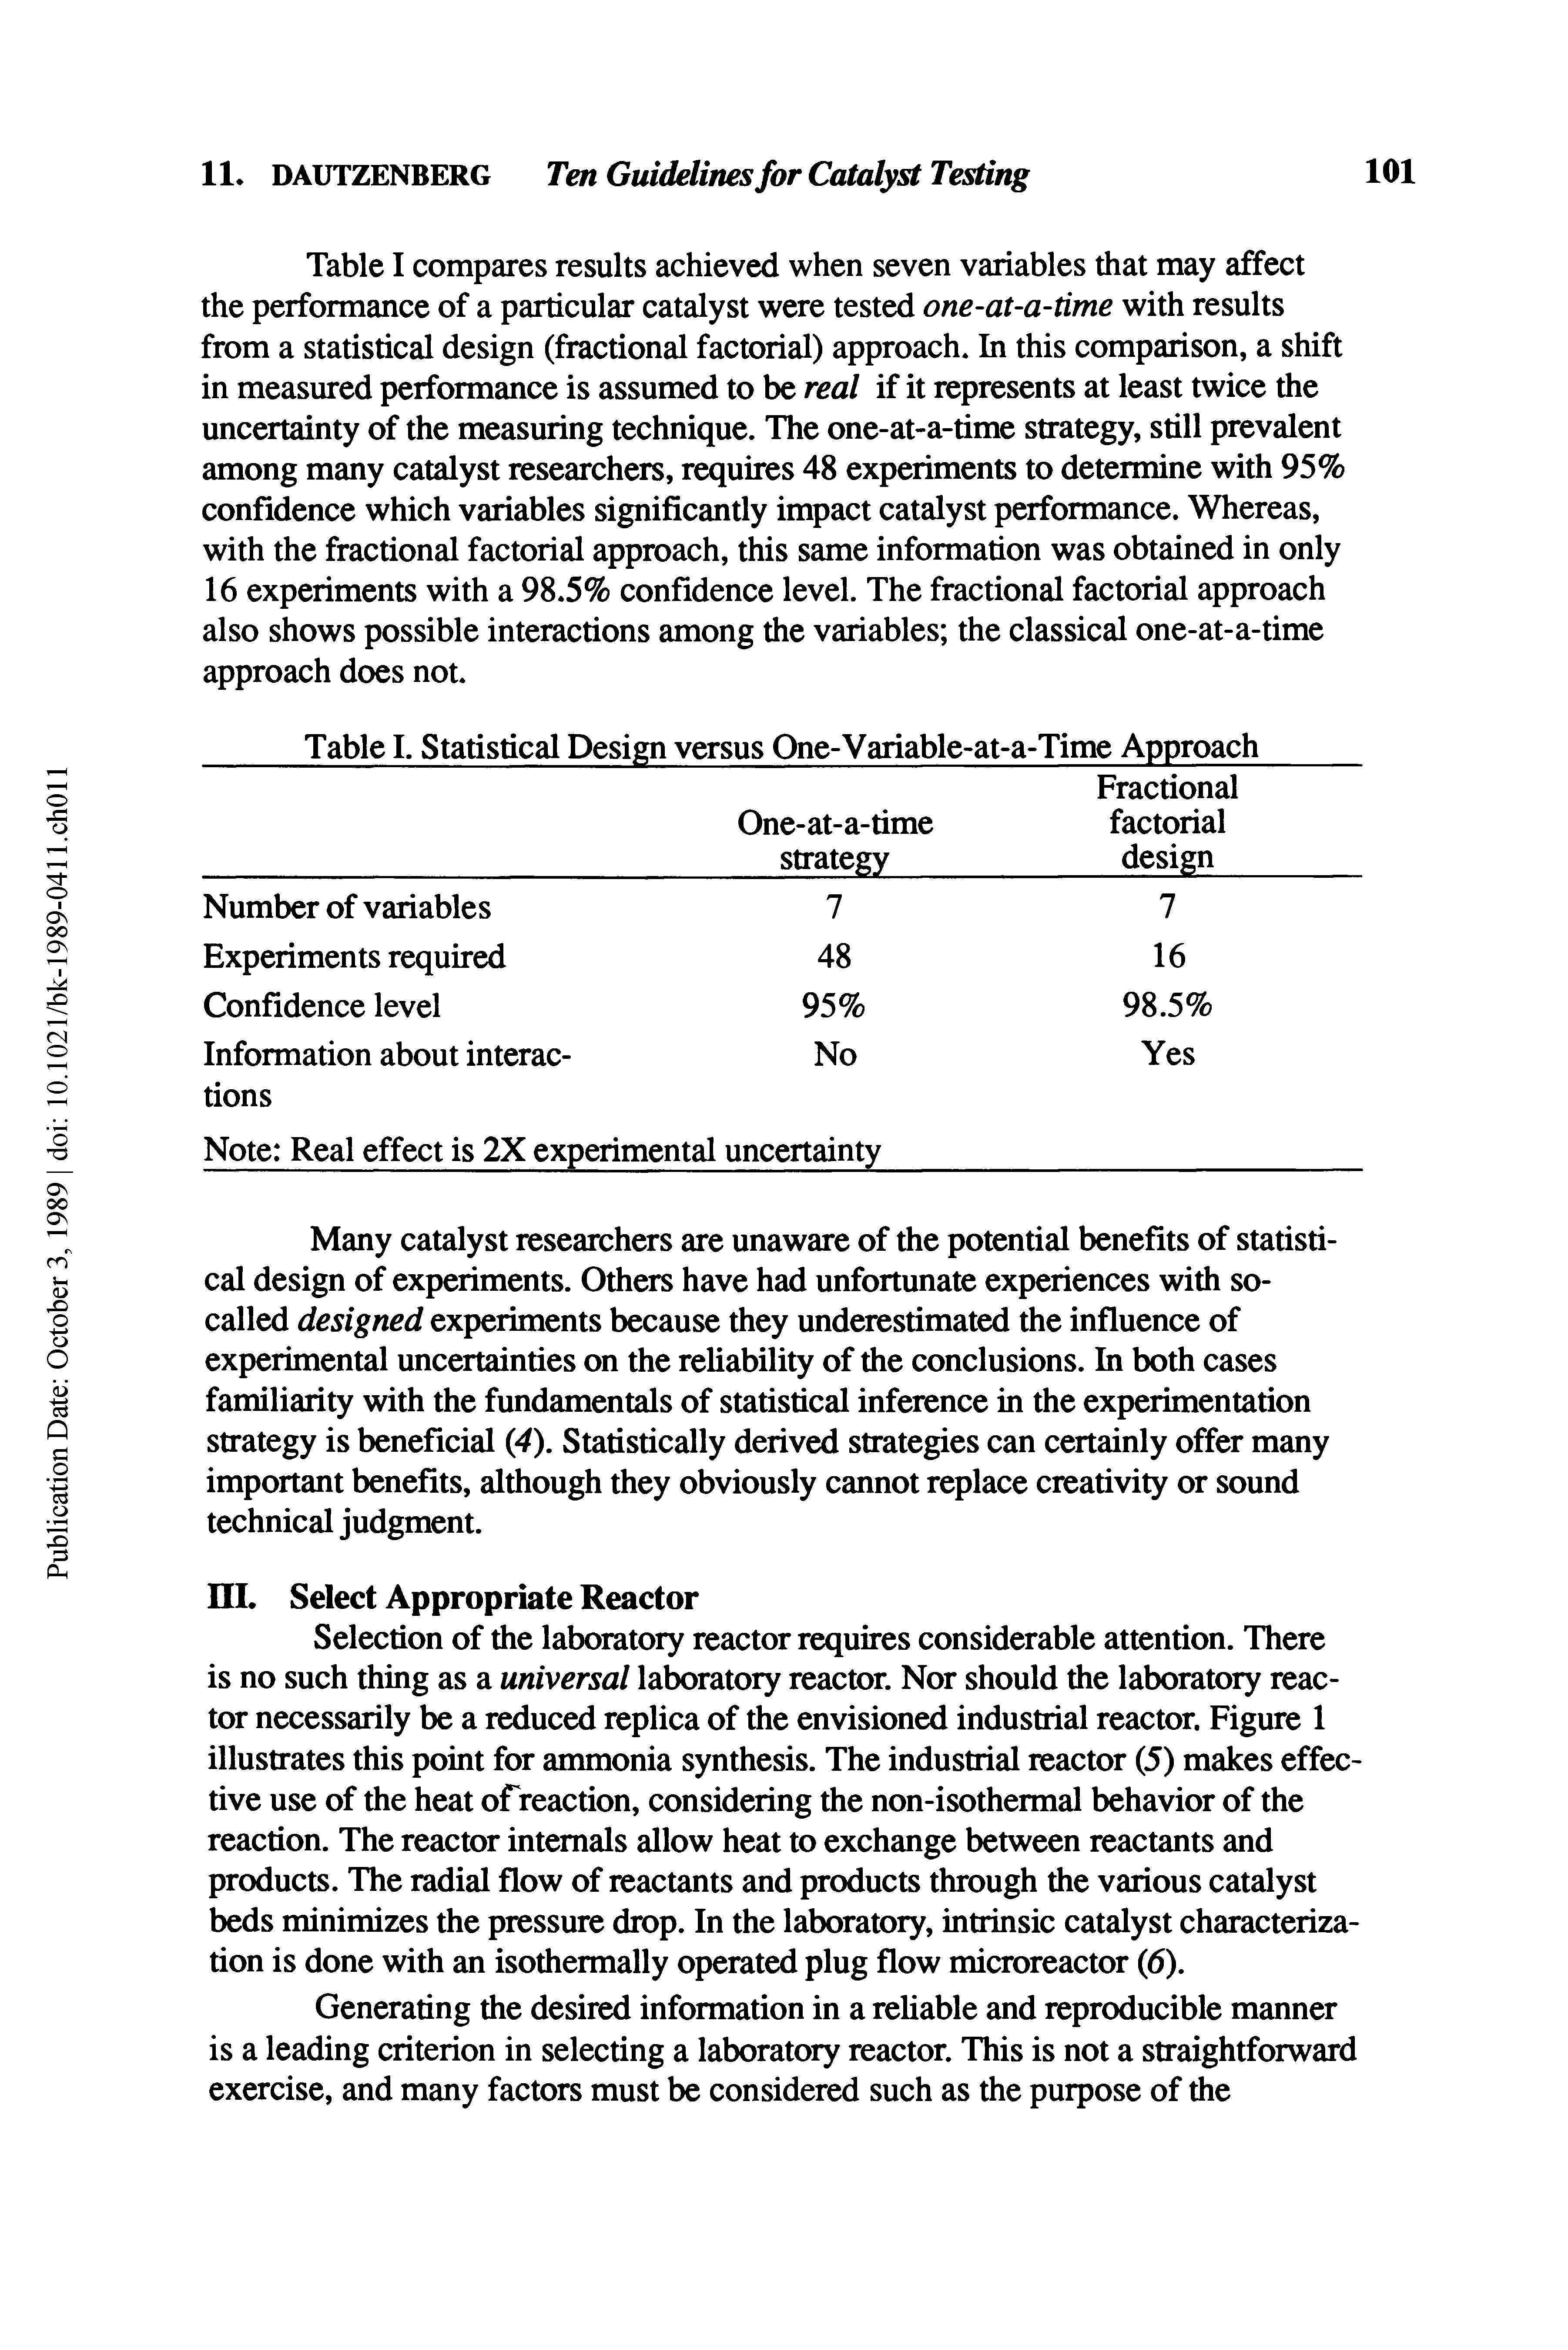 Table I compares results achieved when seven variables that may affect the performance of a particular catalyst were tested one-at-a-time with results from a statistical design (fractional factorial) approach. In this comparison, a shift in measured performance is assumed to be real if it represents at least twice the uncertainty of the measuring technique. The one-at-a-time strategy, still prevalent among many catalyst researchers, requires 48 experiments to determine with 95% confidence which variables significantly impact catalyst performance. Whereas, with the fractional factorial approach, this same information was obtained in only 16 experiments with a 98.5% confidence level. The fractional factorial approach also shows possible interactions among the variables the classical one-at-a-time approach does not.